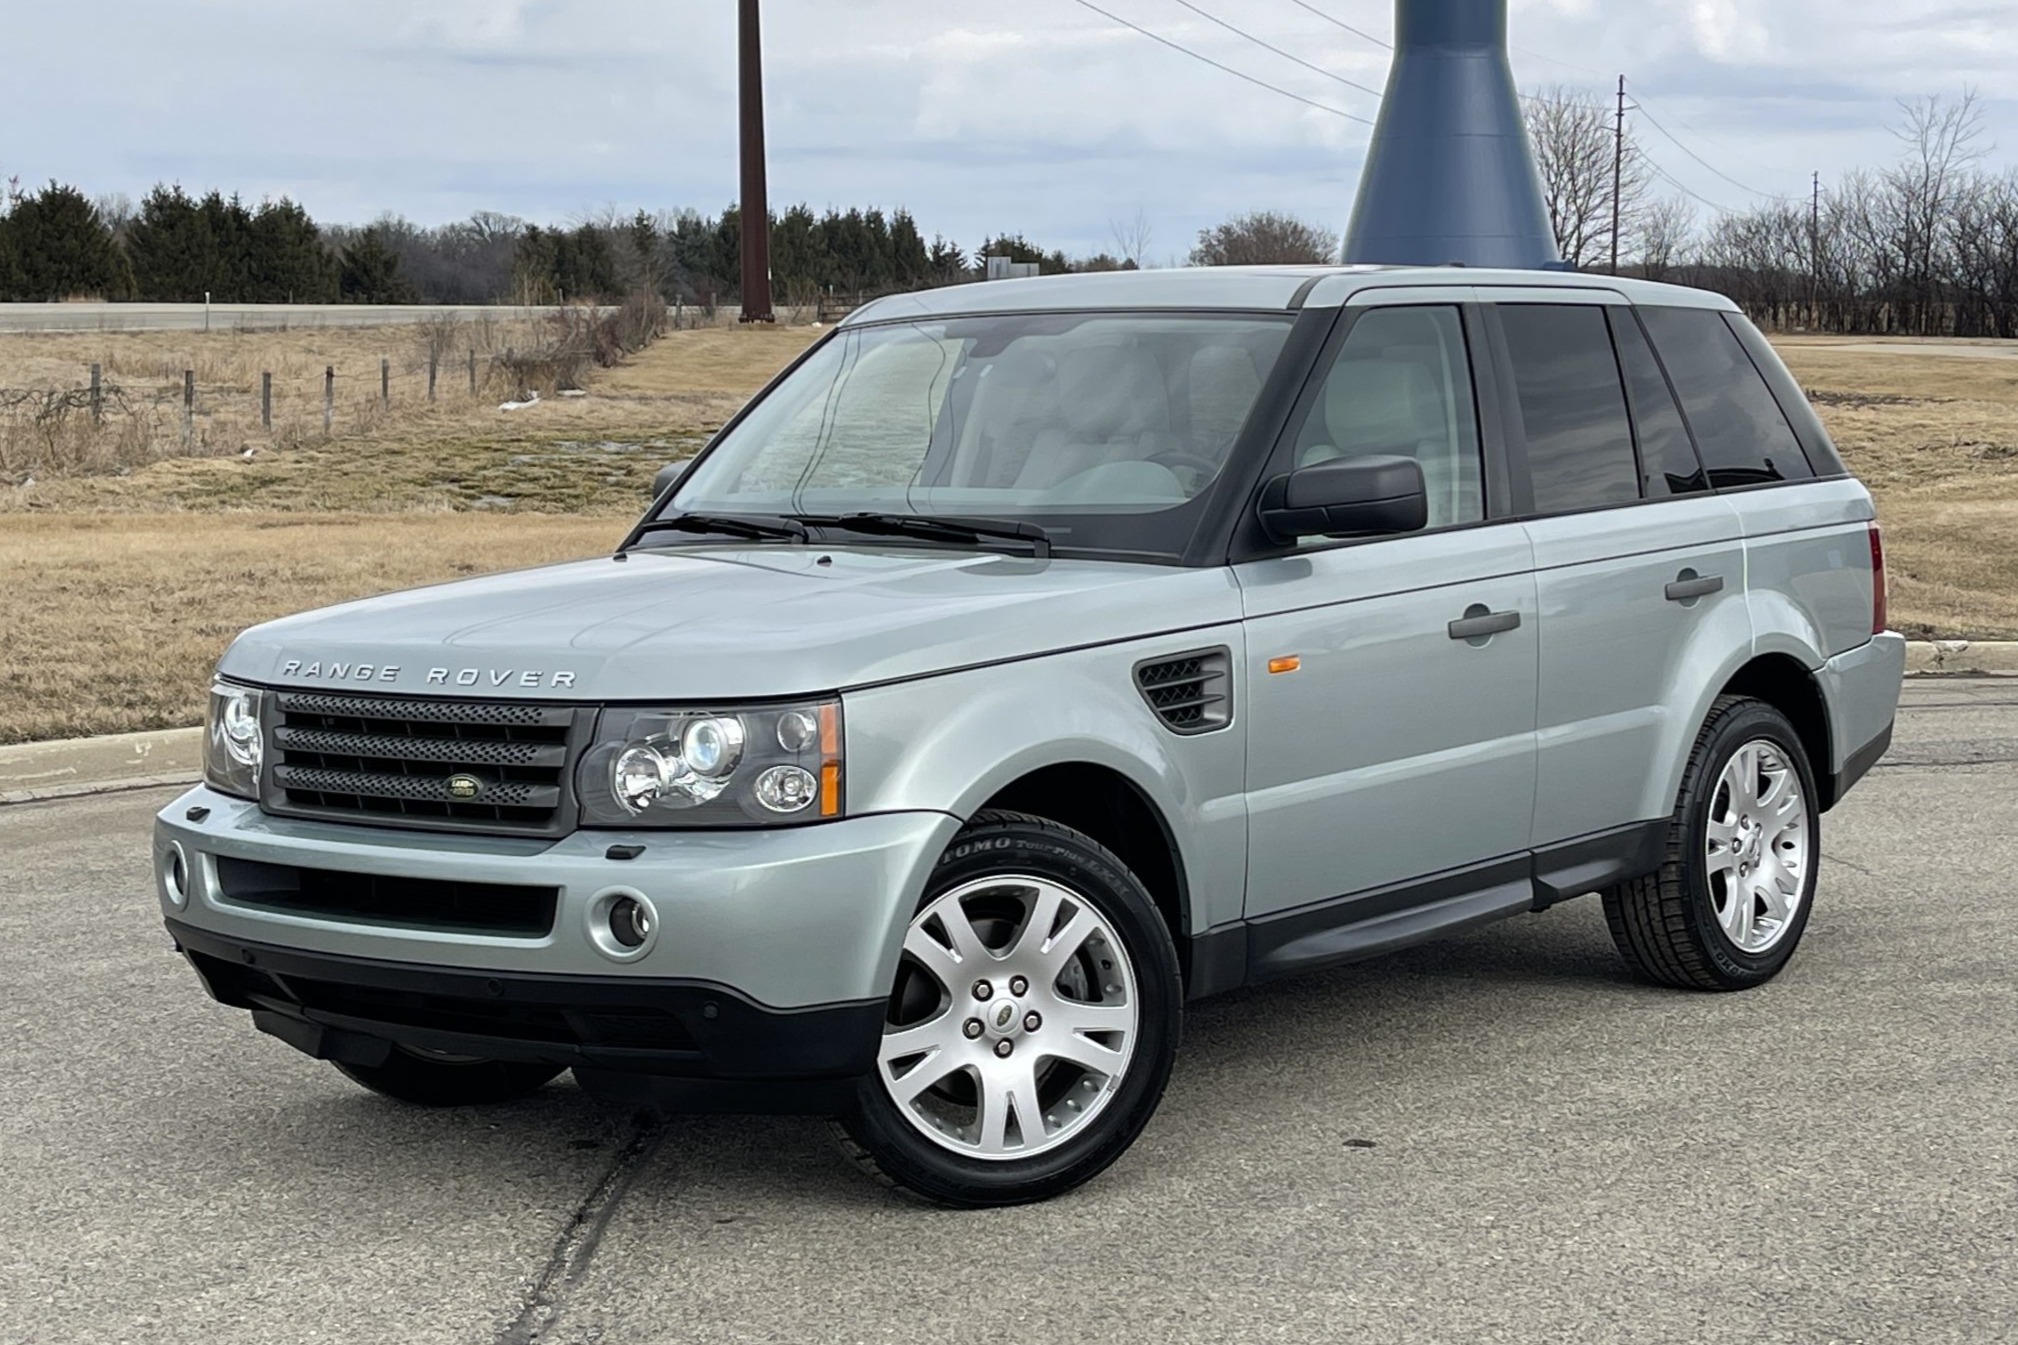 No Reserve: 2006 Land Rover Range Rover Sport HSE for sale on BaT Auctions  - sold for $20,250 on April 12, 2022 (Lot #70,438) | Bring a Trailer